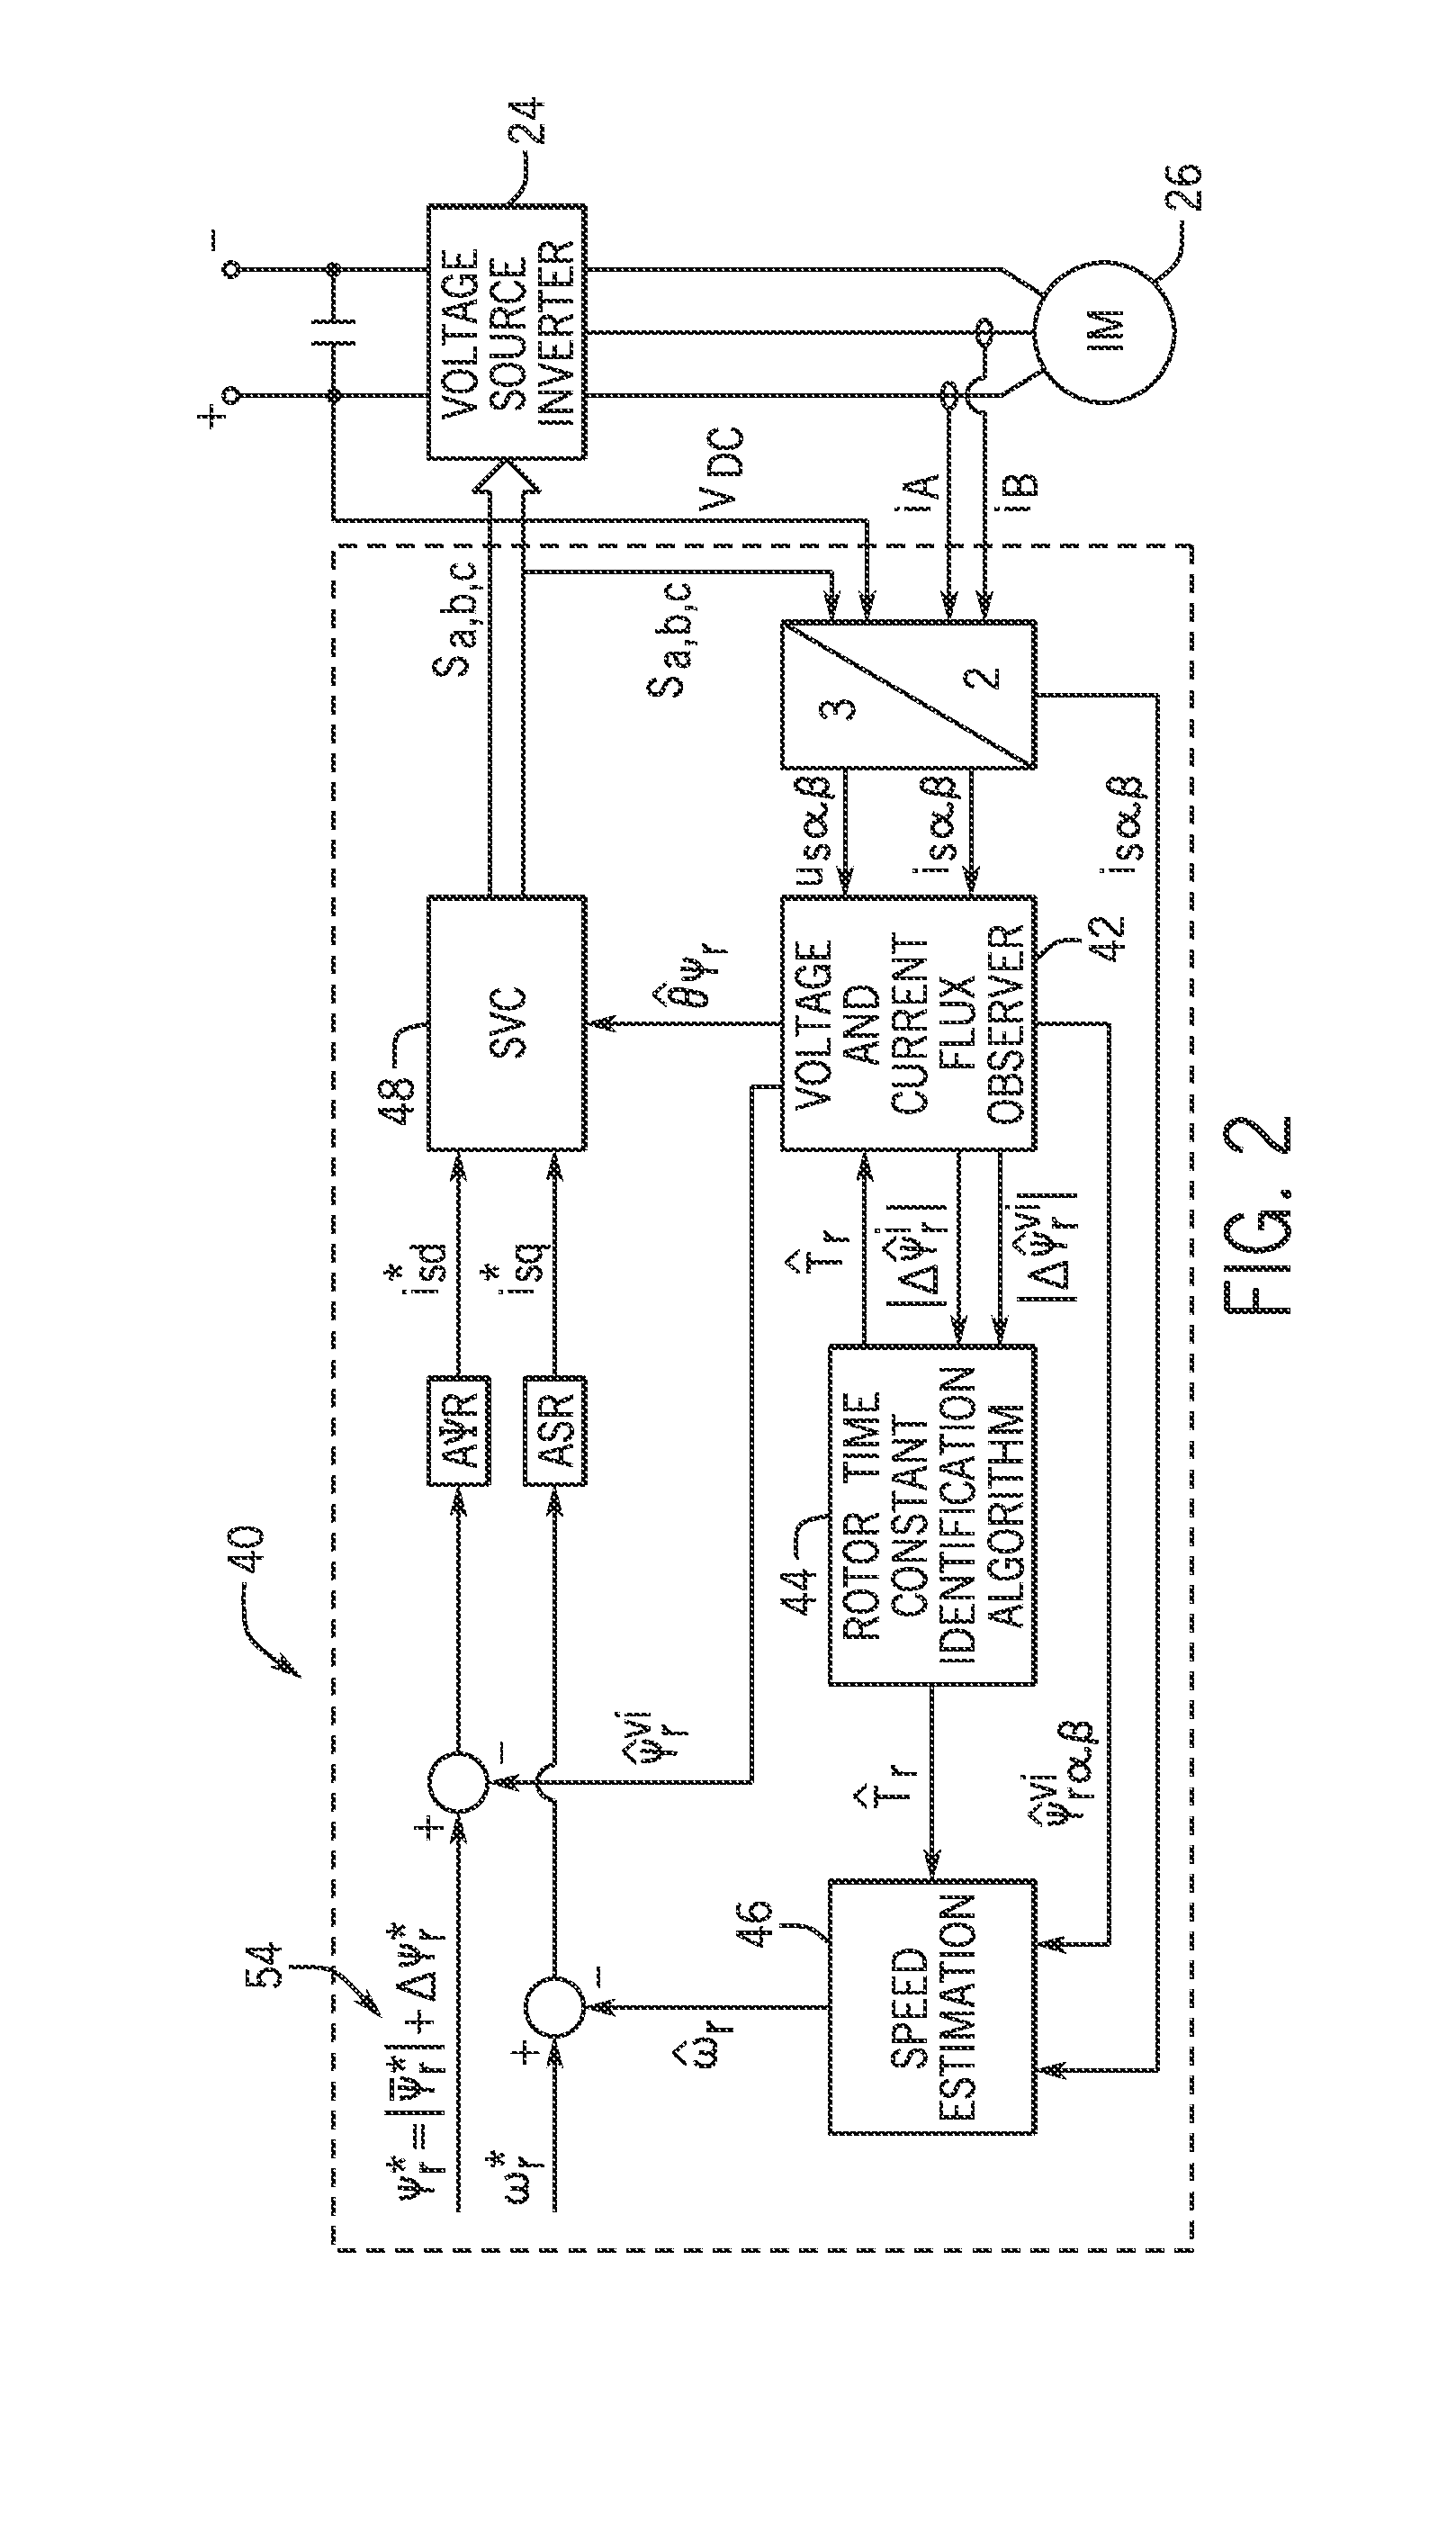 System and method of rotor time constant online identification in an ac induction machine